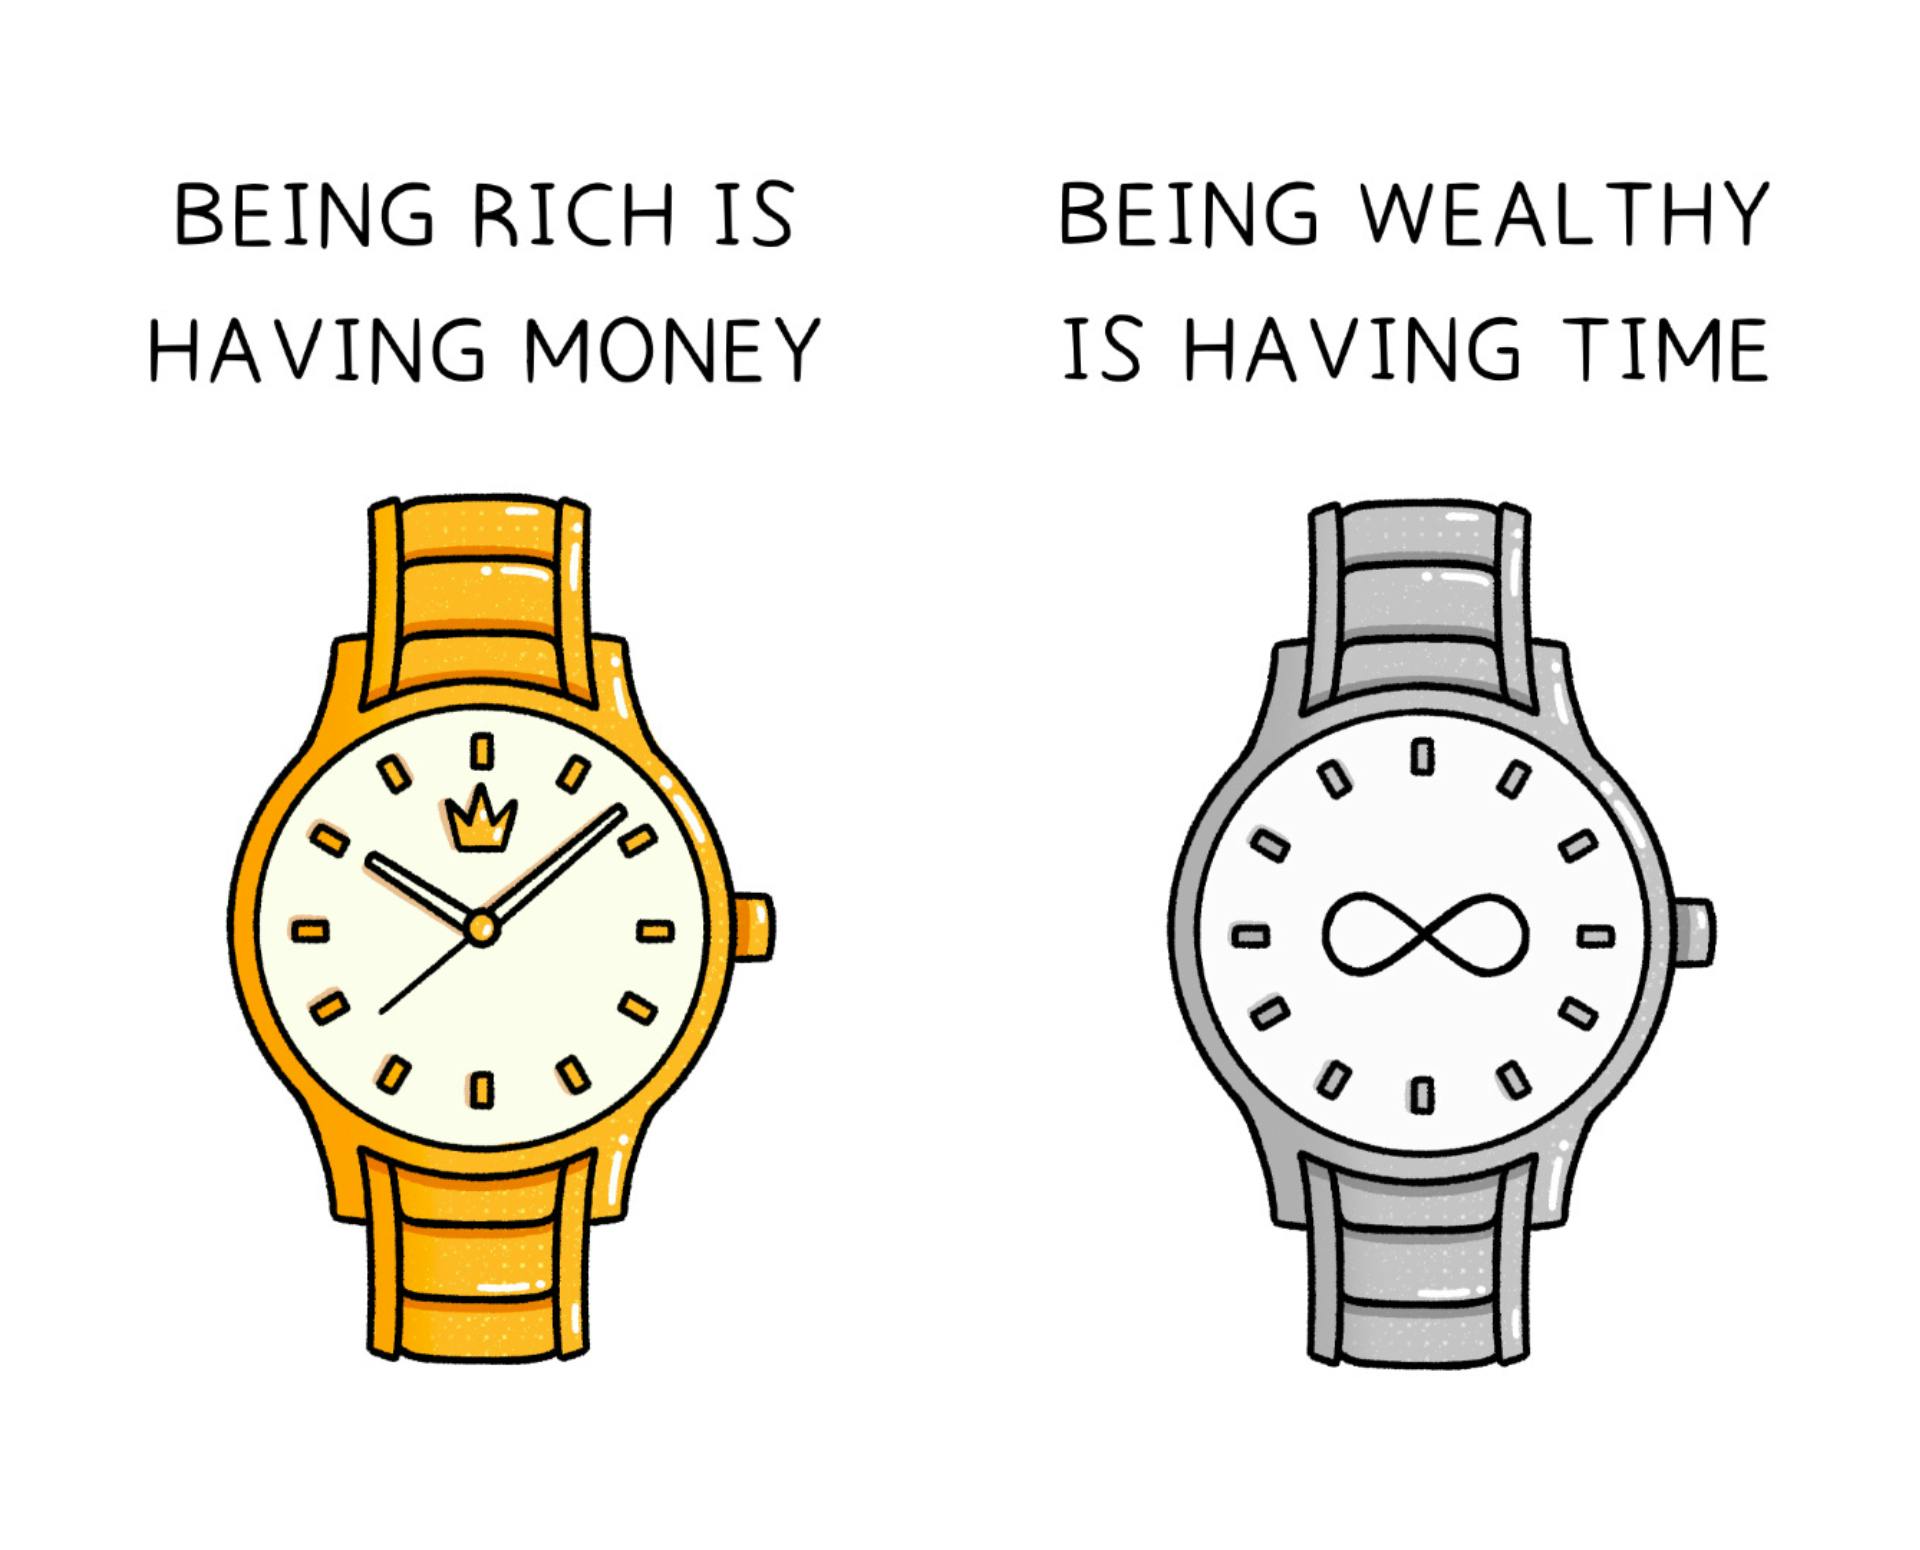 Being rich is having money, being wealthy is having time, with illustration